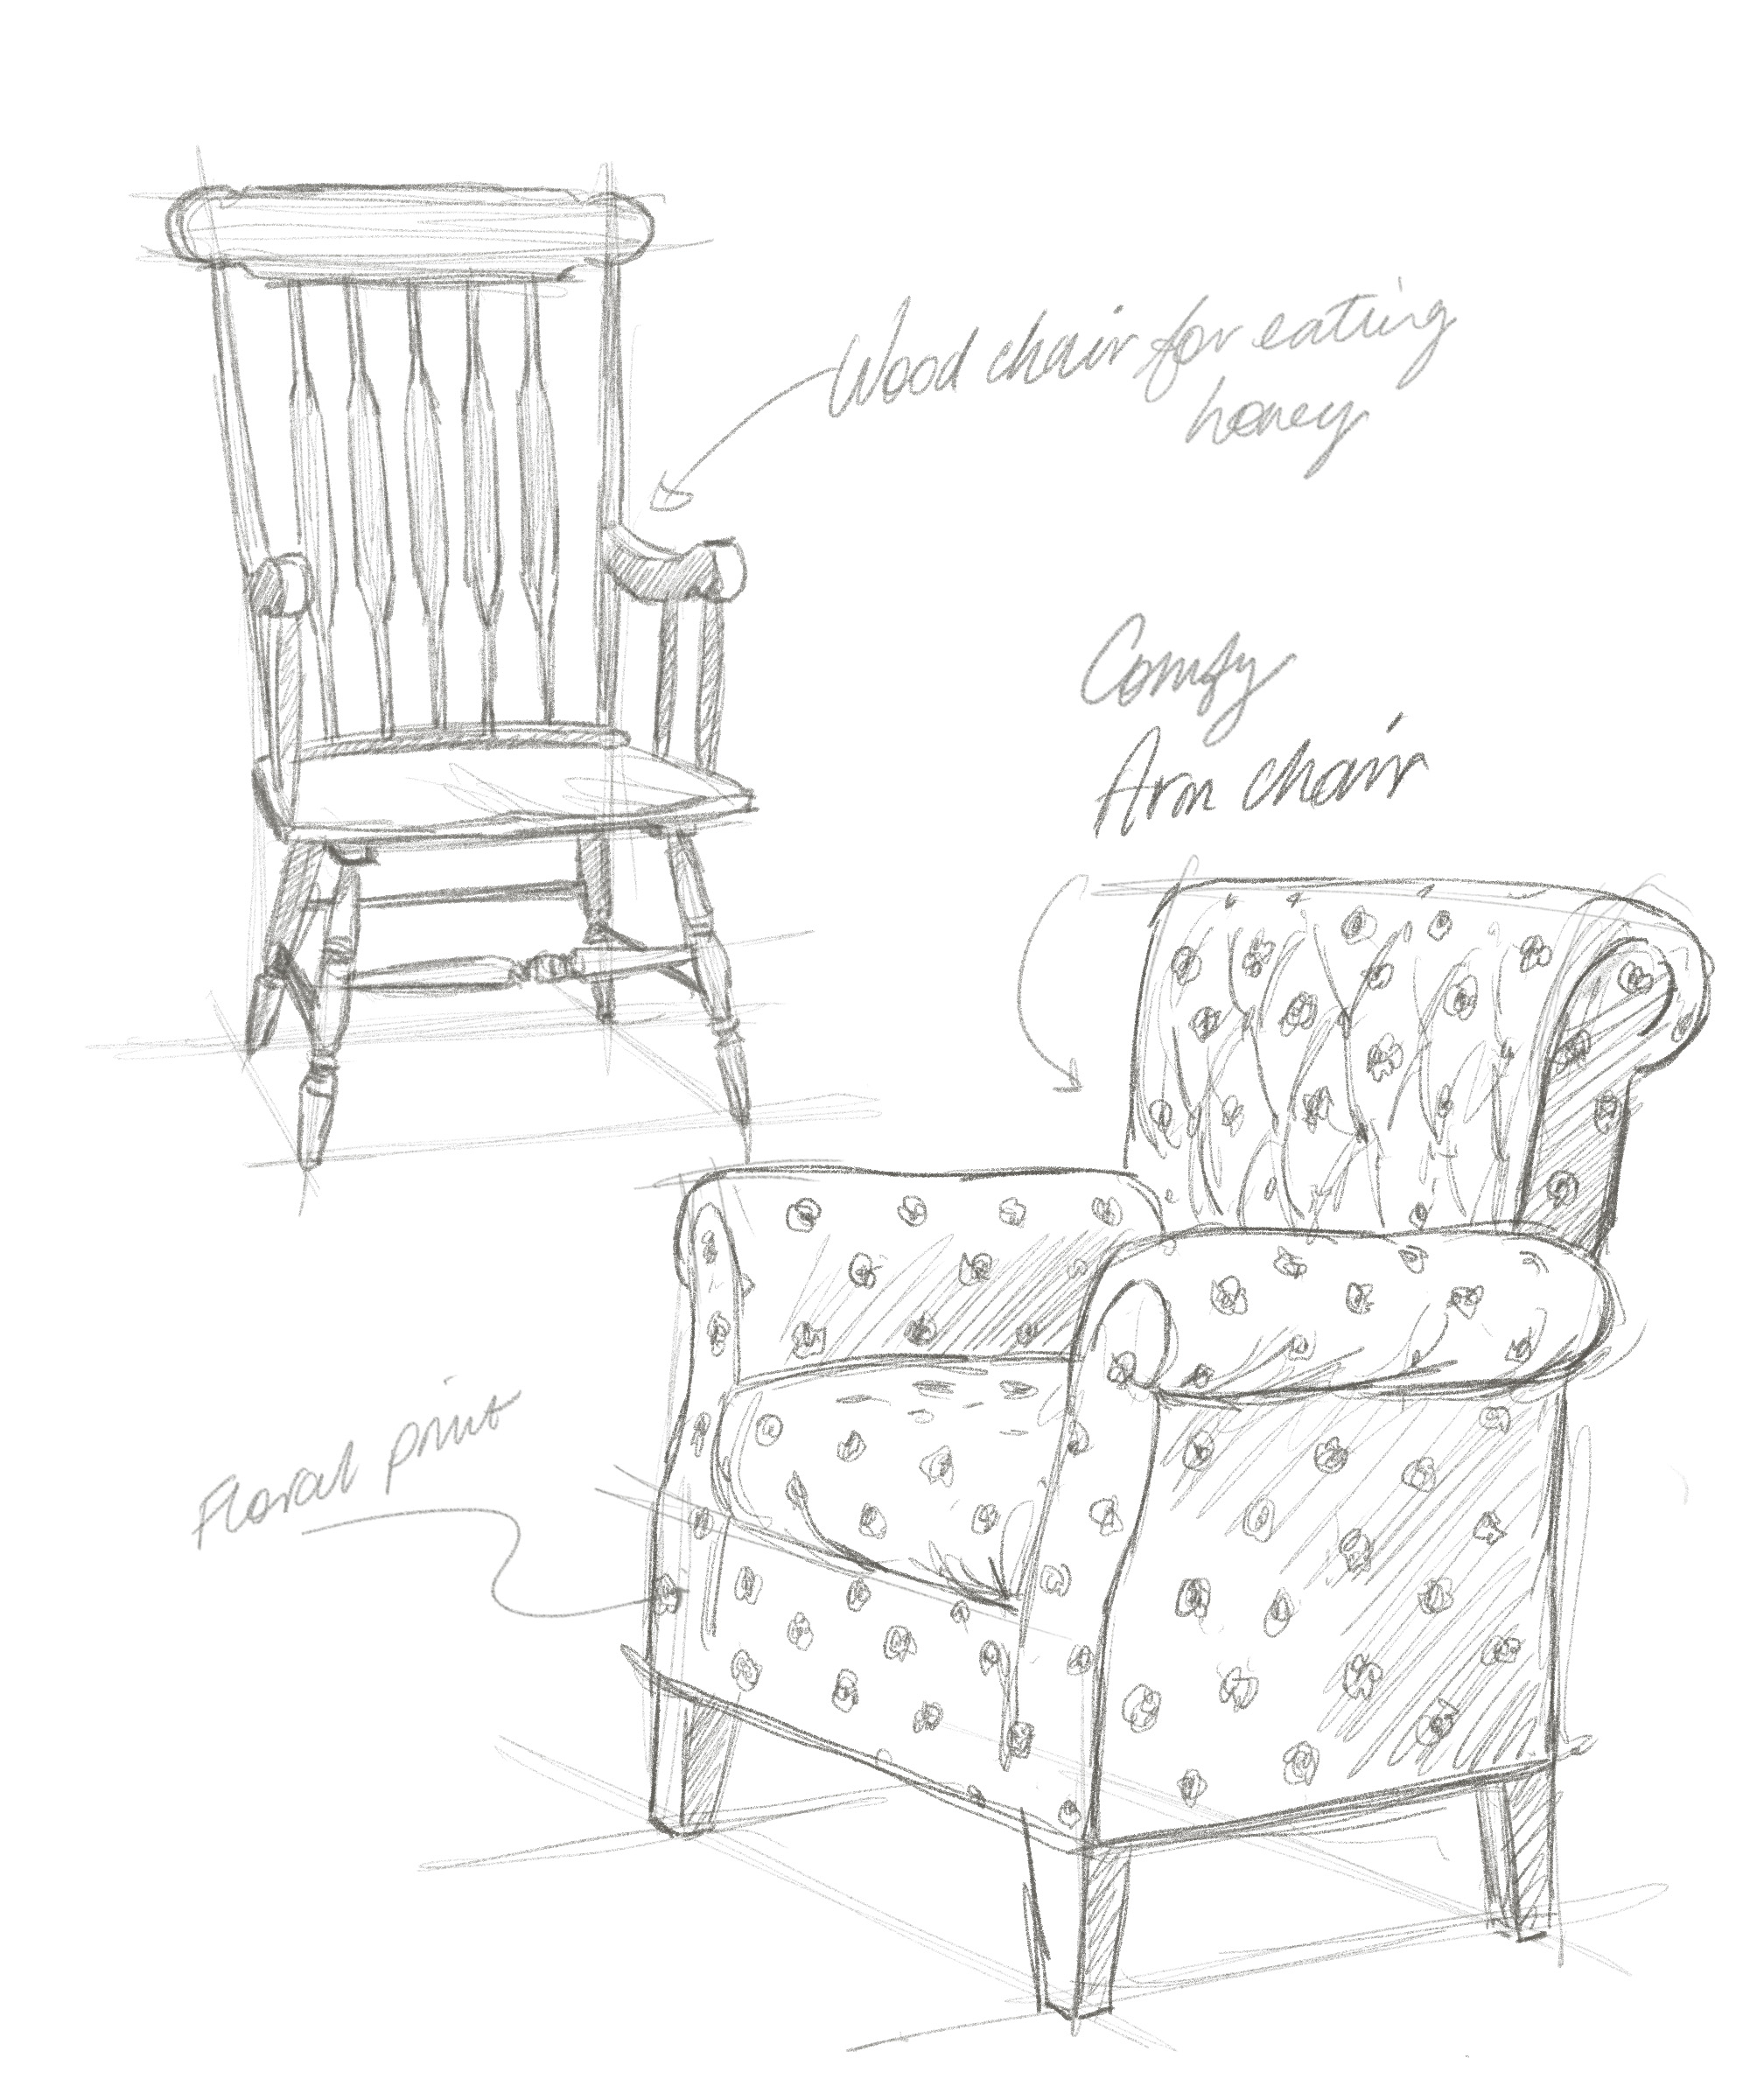 The design sketches for some of the Bearbnb’s furniture